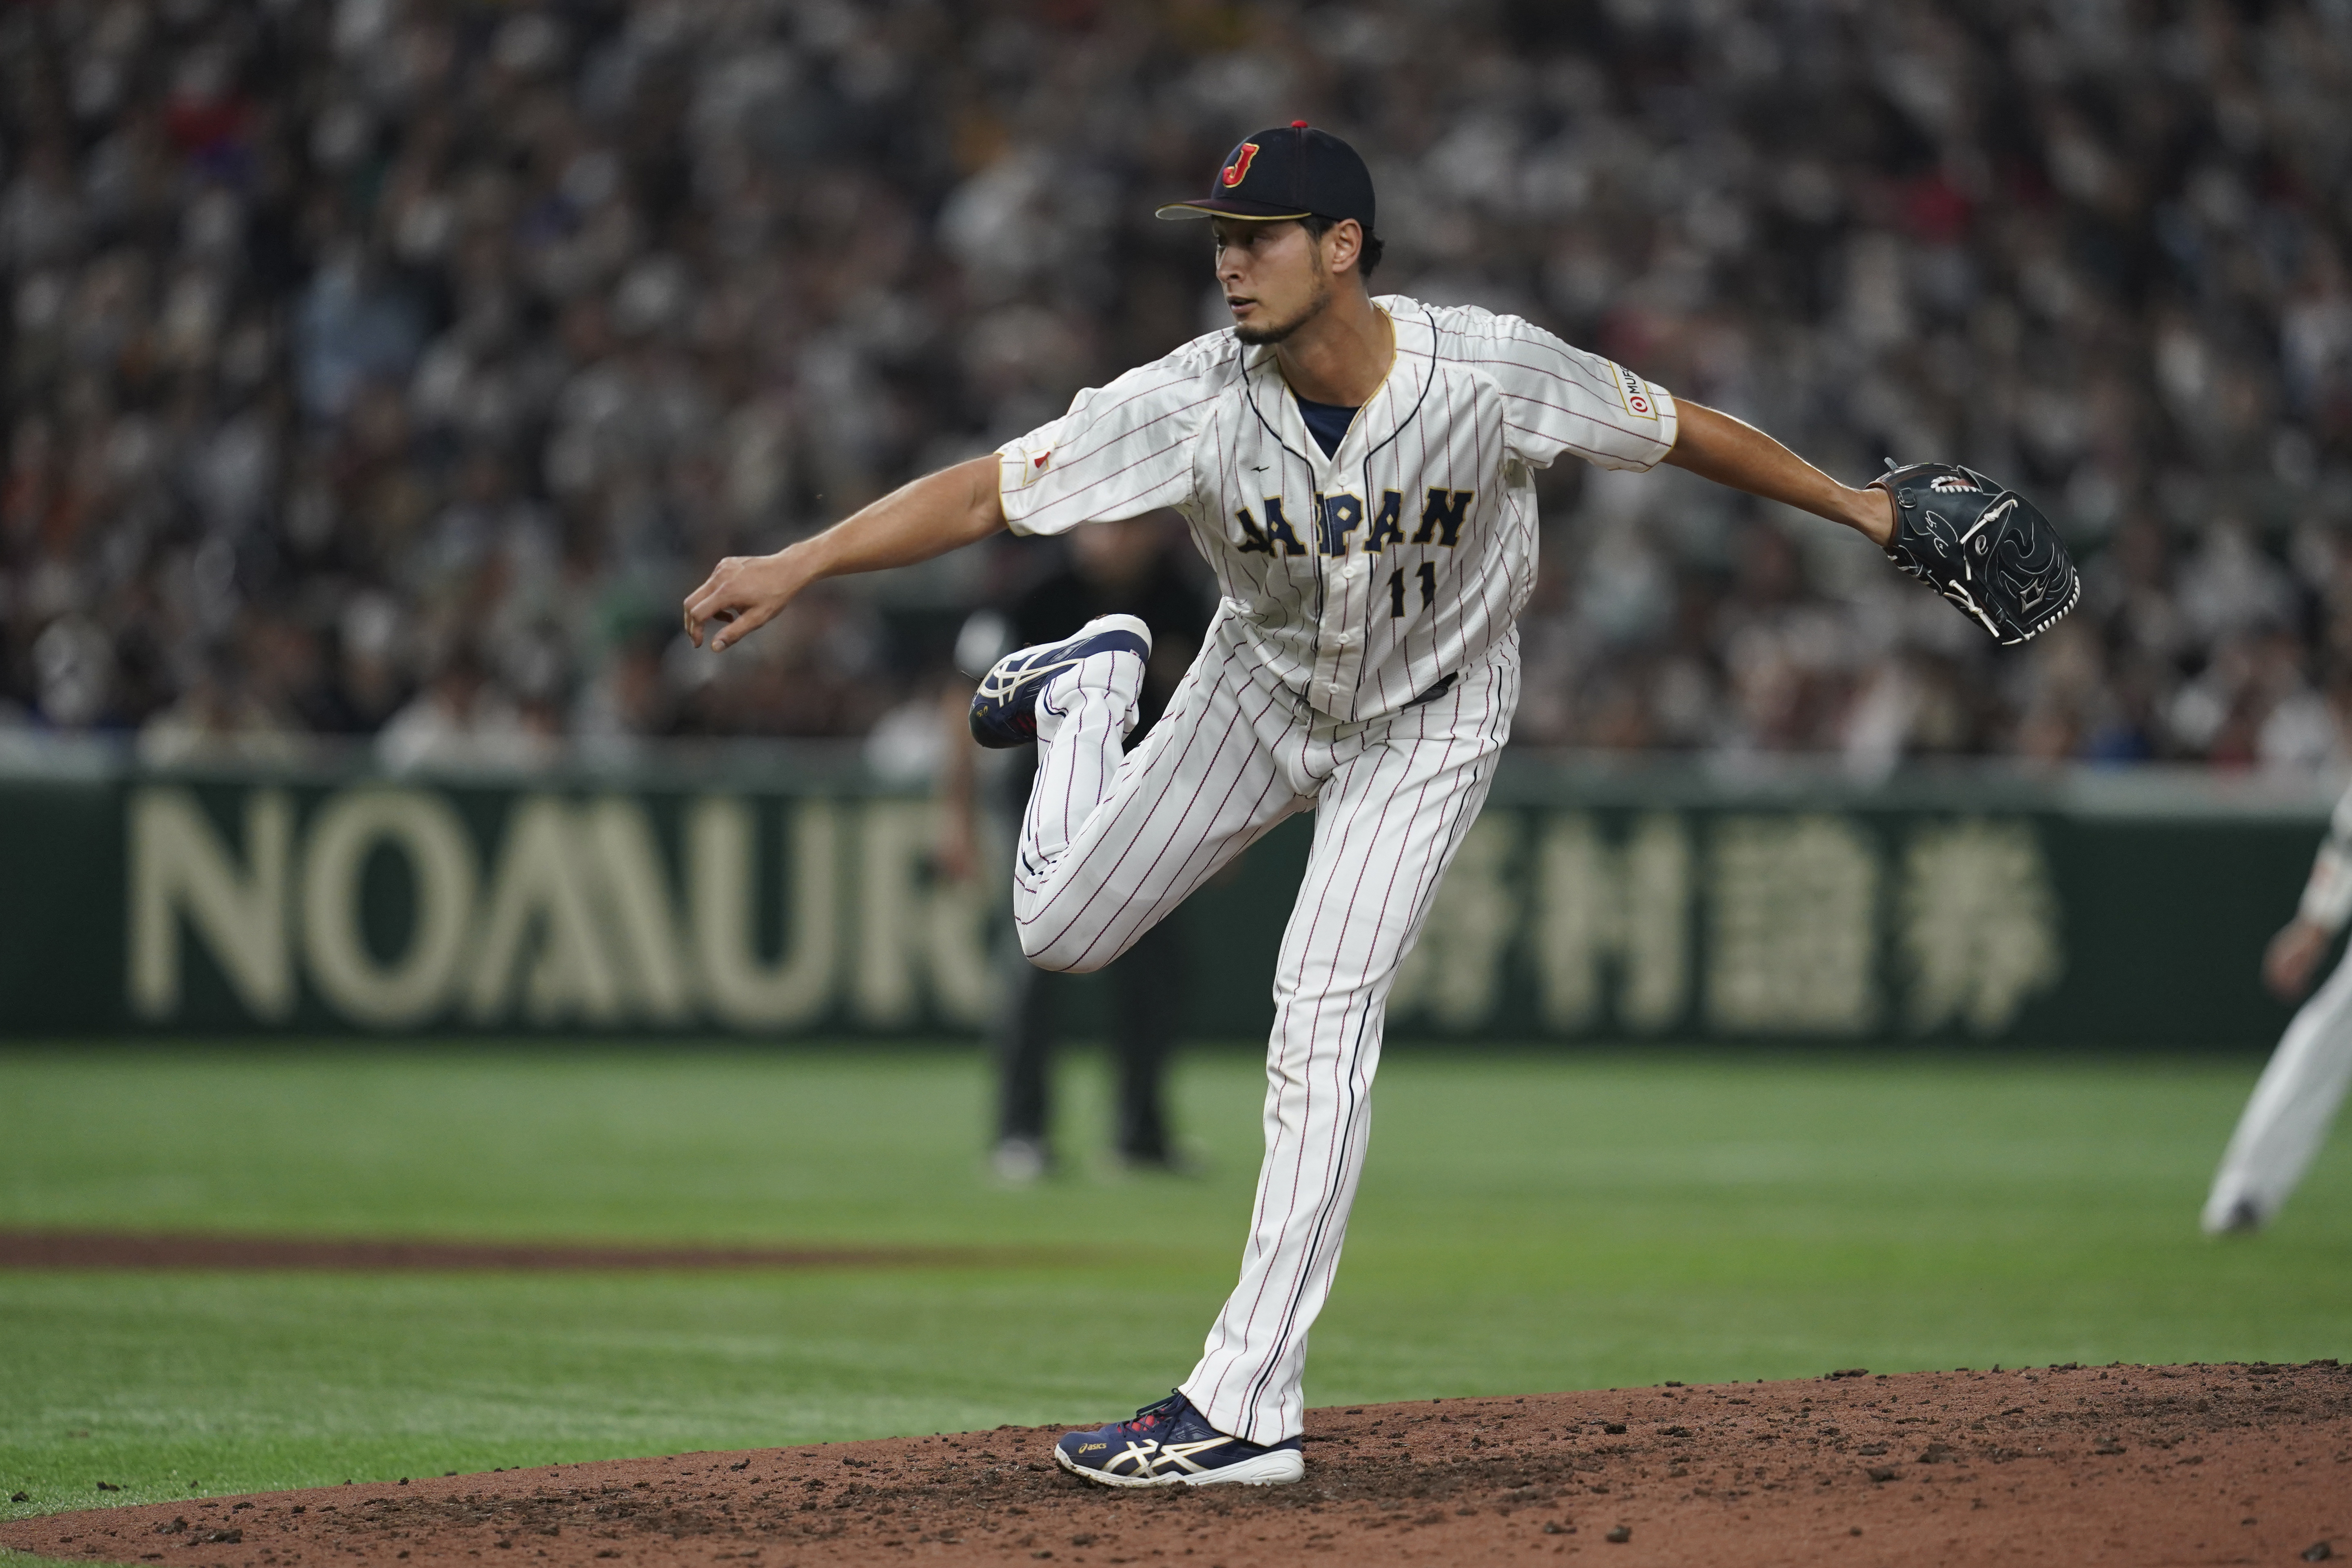 Japan rides Ohtani into semifinals